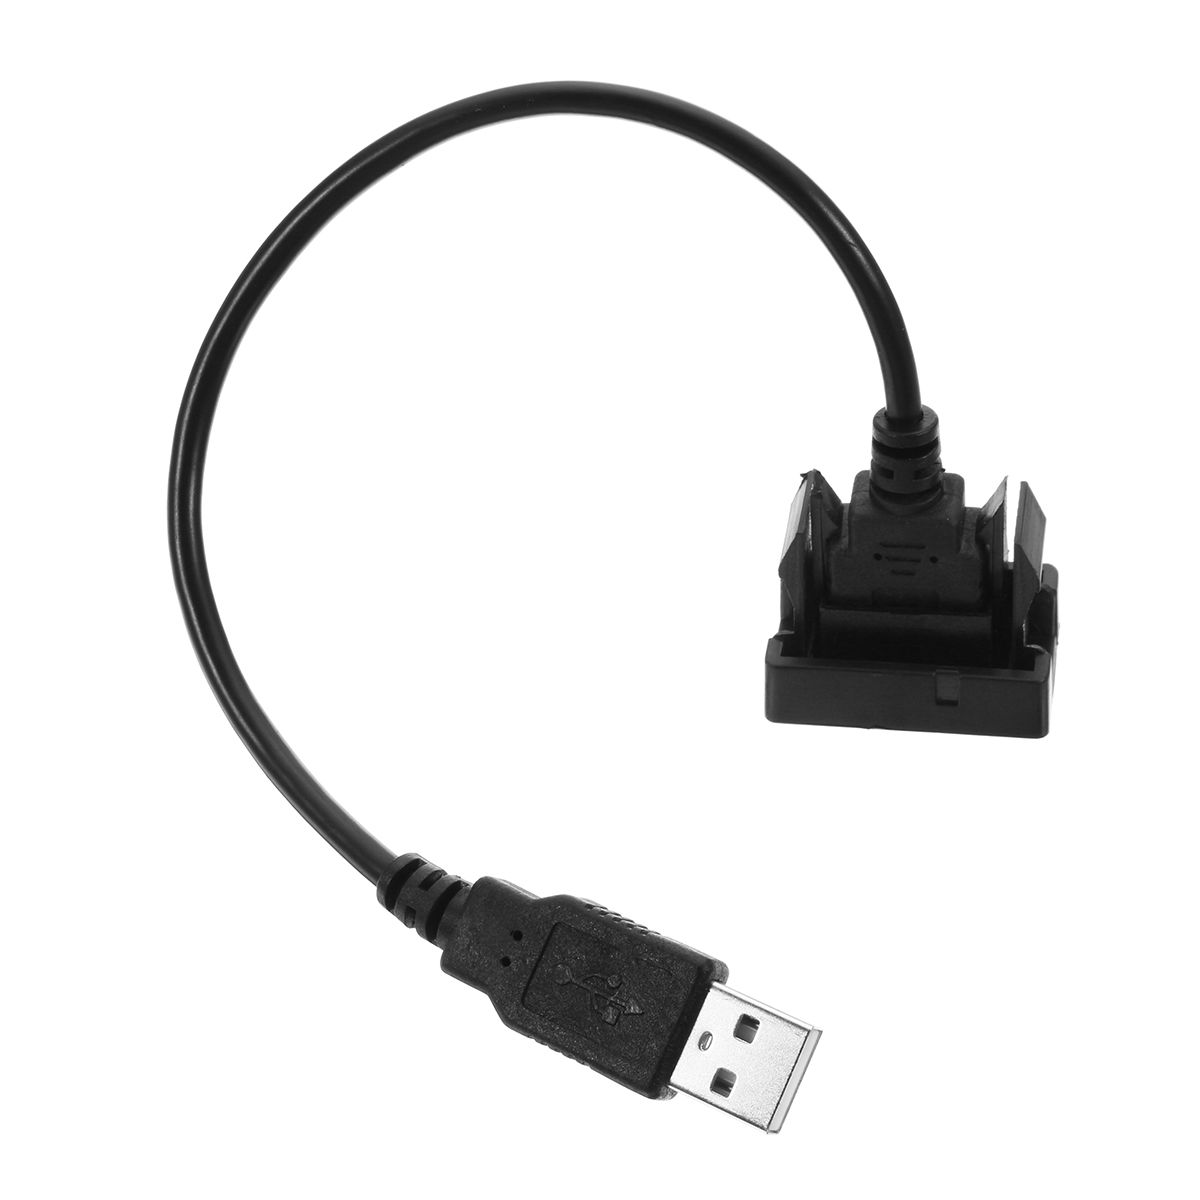 Car-USB-20-Extension-Lead-Cable-Auto-Dashboard-Flush-Mount-Interface-Adapter-Cord-for-Toyota-1229746